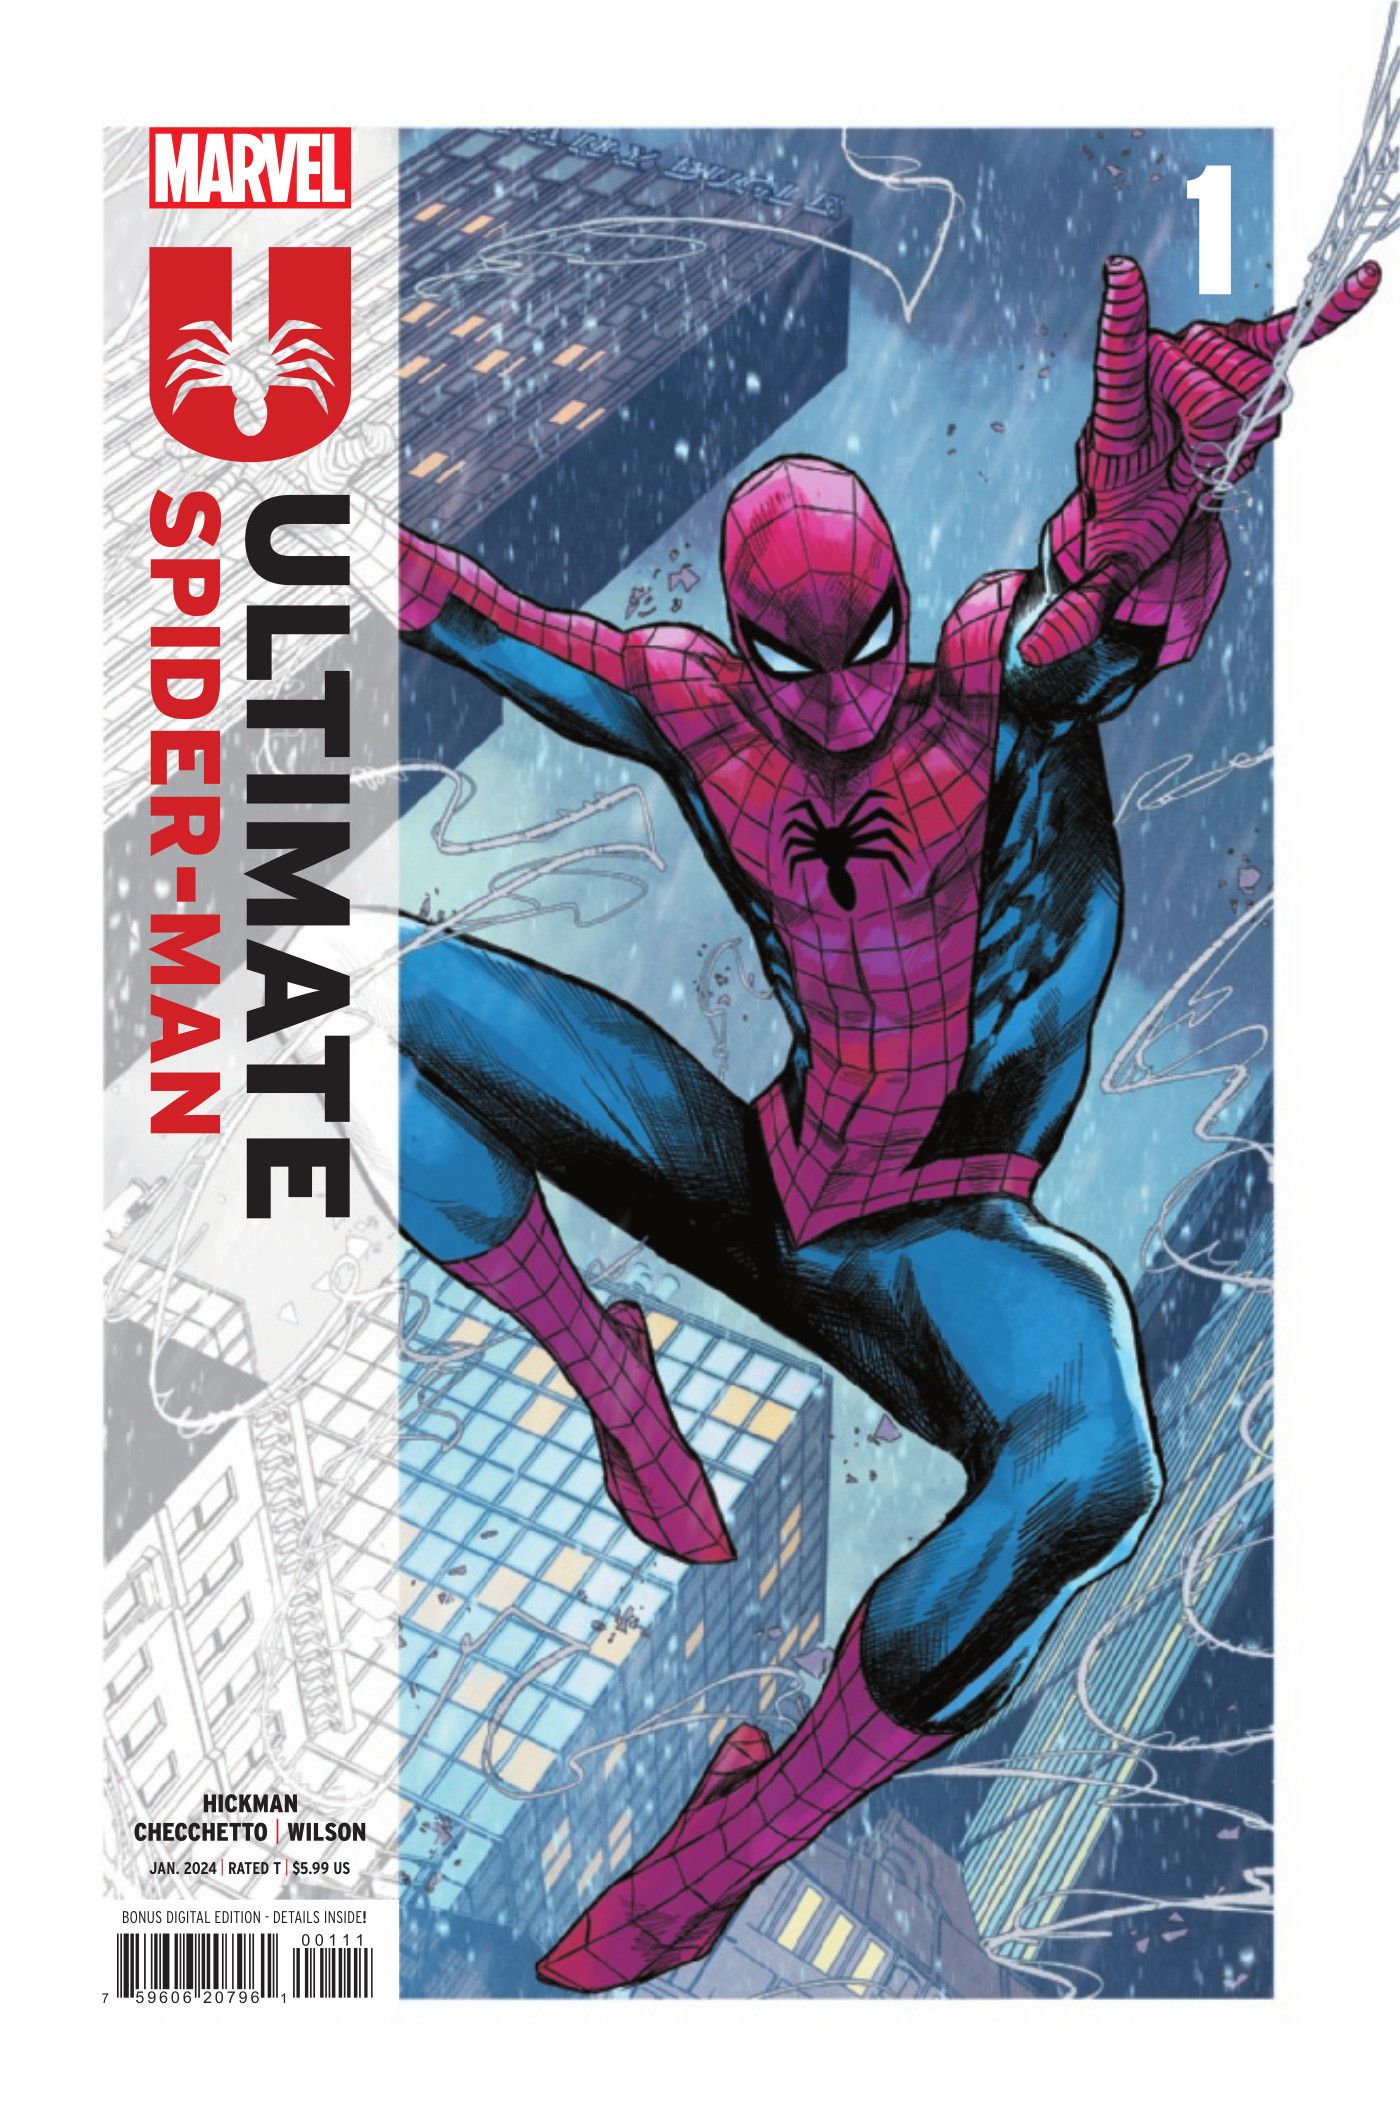 Ultimate Spider-Man #1 ACover by Marco Checcetto and Matthew Wilson